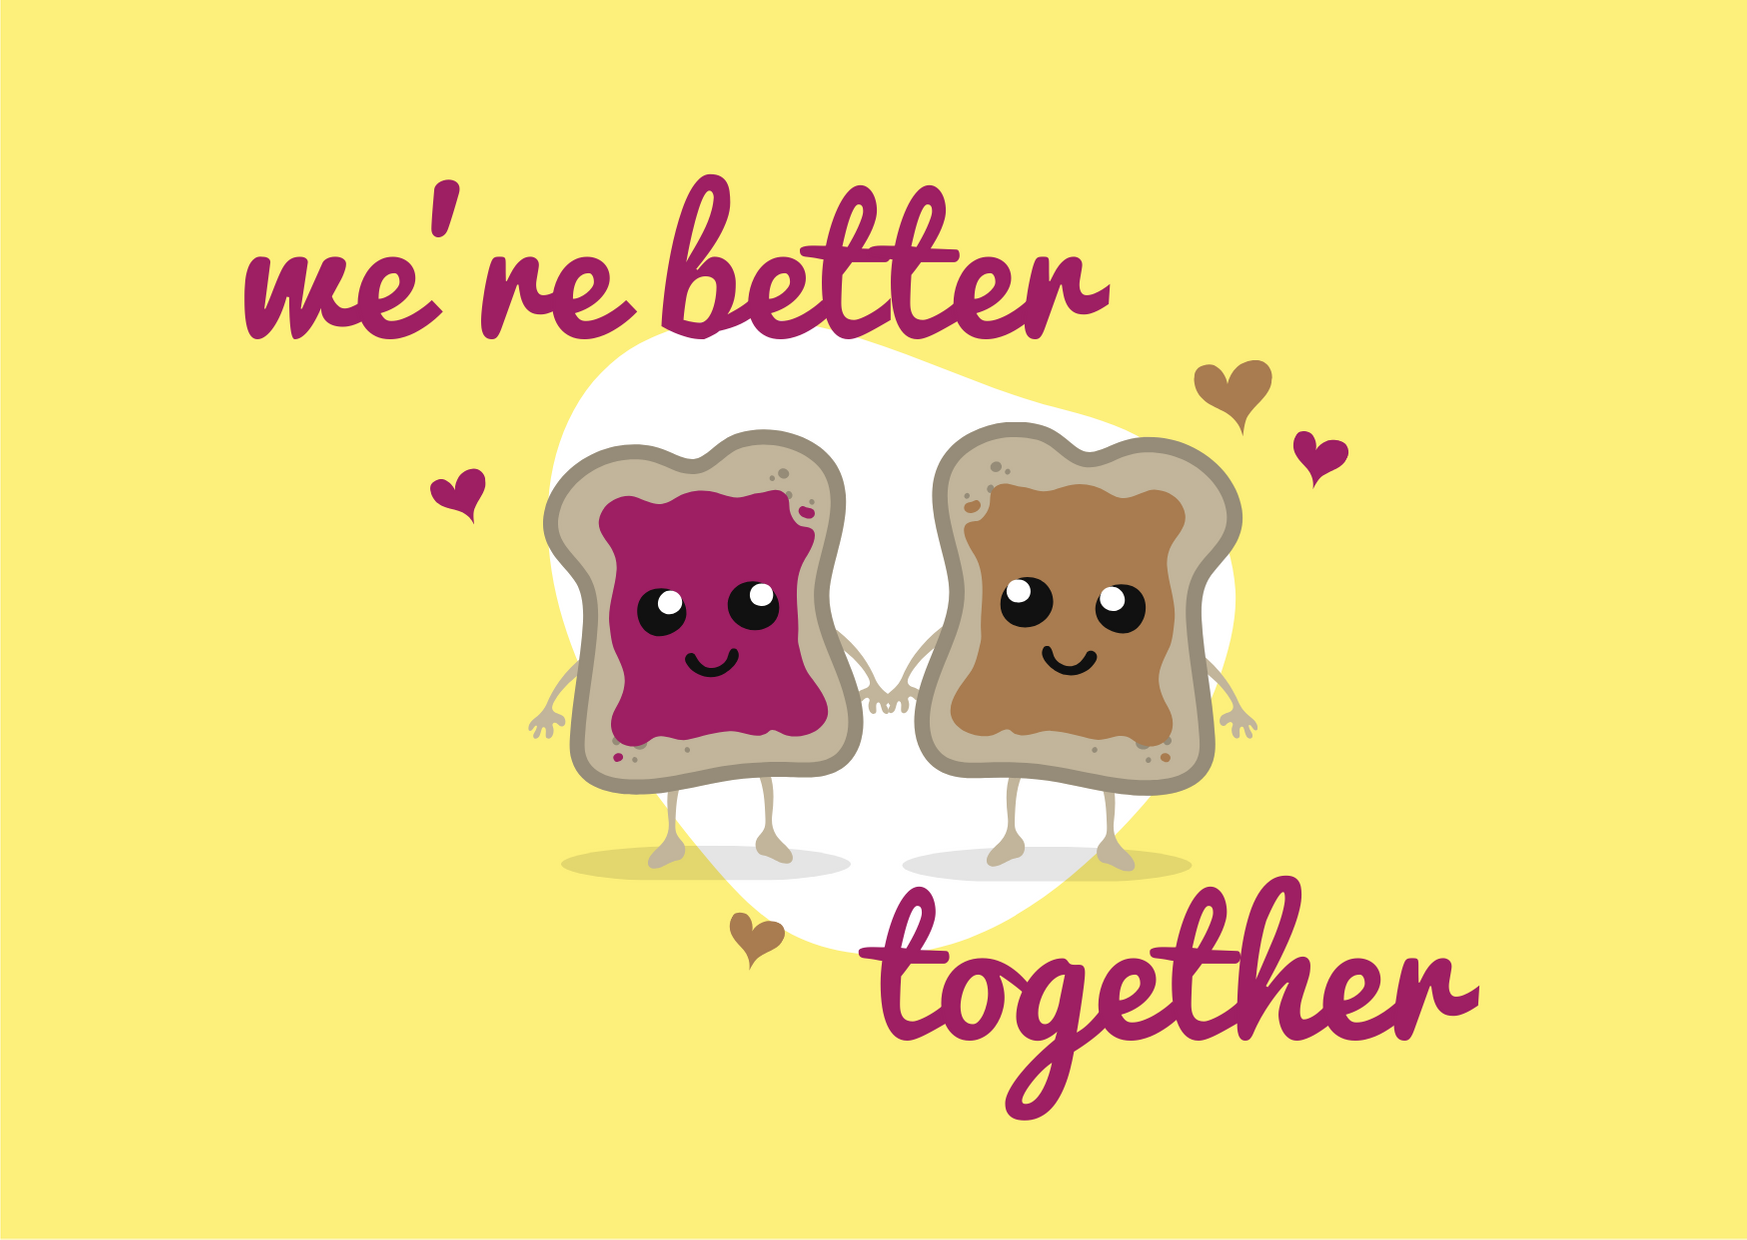 Peanut Butter and Jelly are better together like citations and research